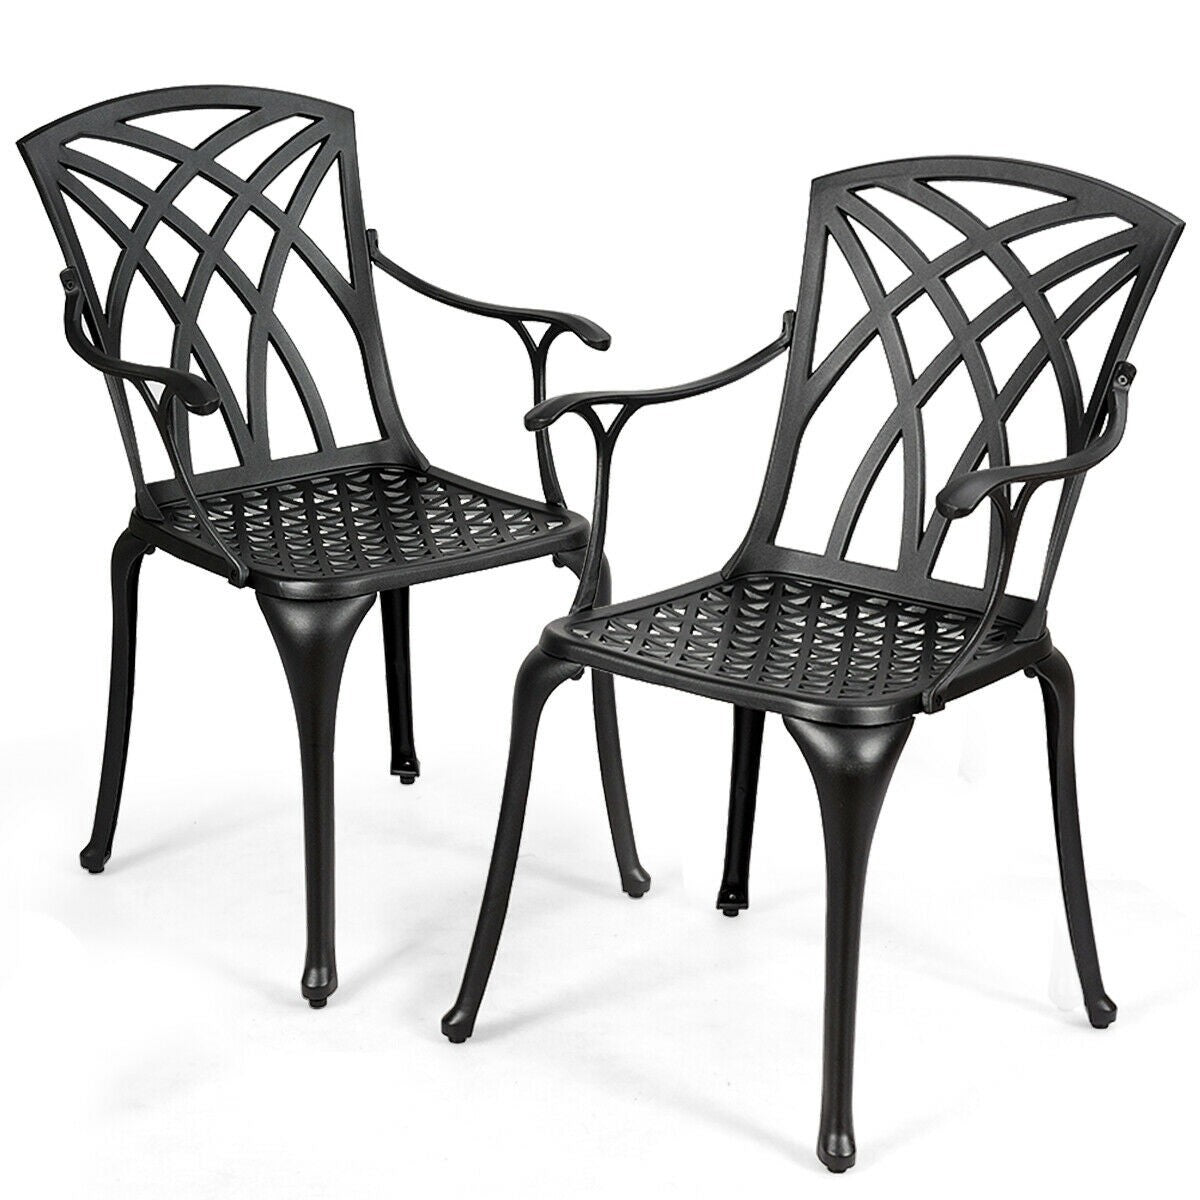 Set of 2 Outdoor Dining Chairs, Cast Aluminum Chairs with Armrest